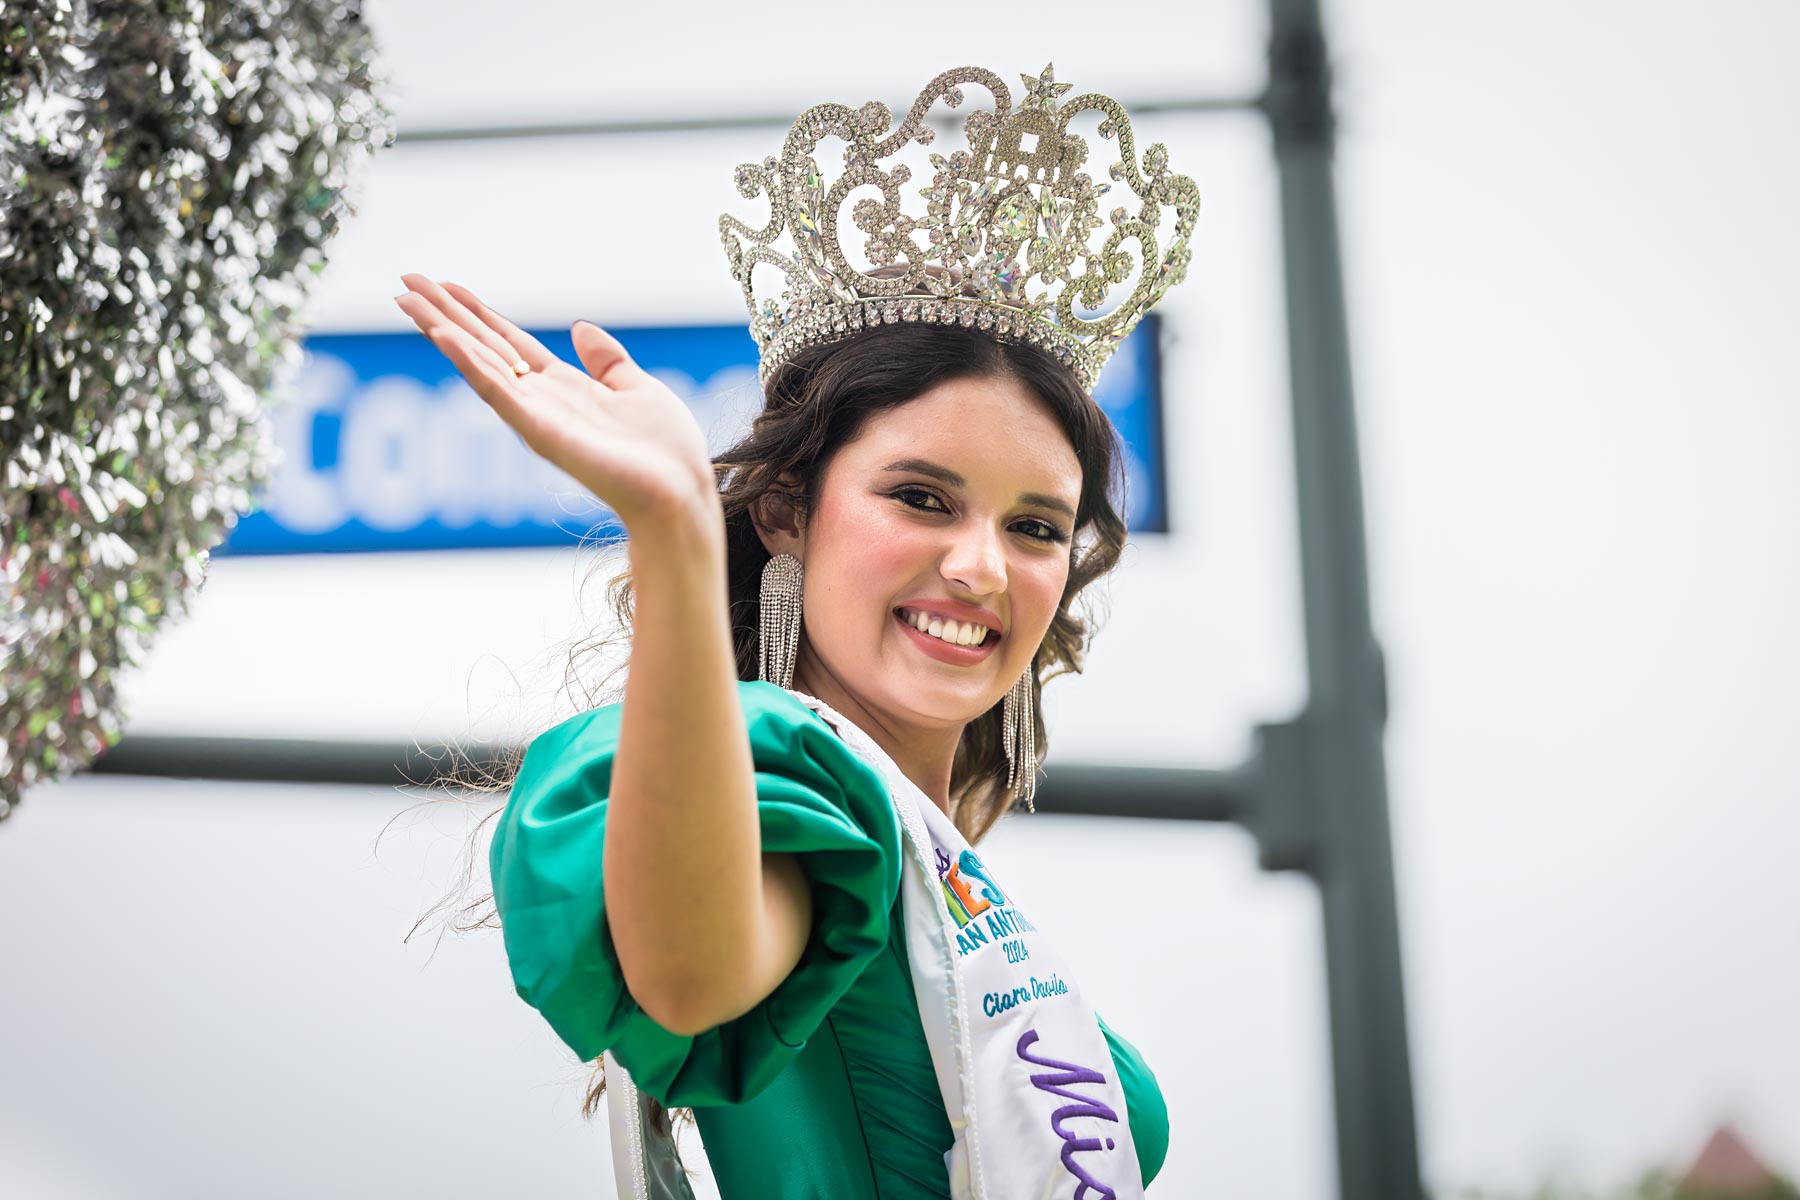 Miss Fiesta wearing green dress and large tiara waving for an article on the best Fiesta photos